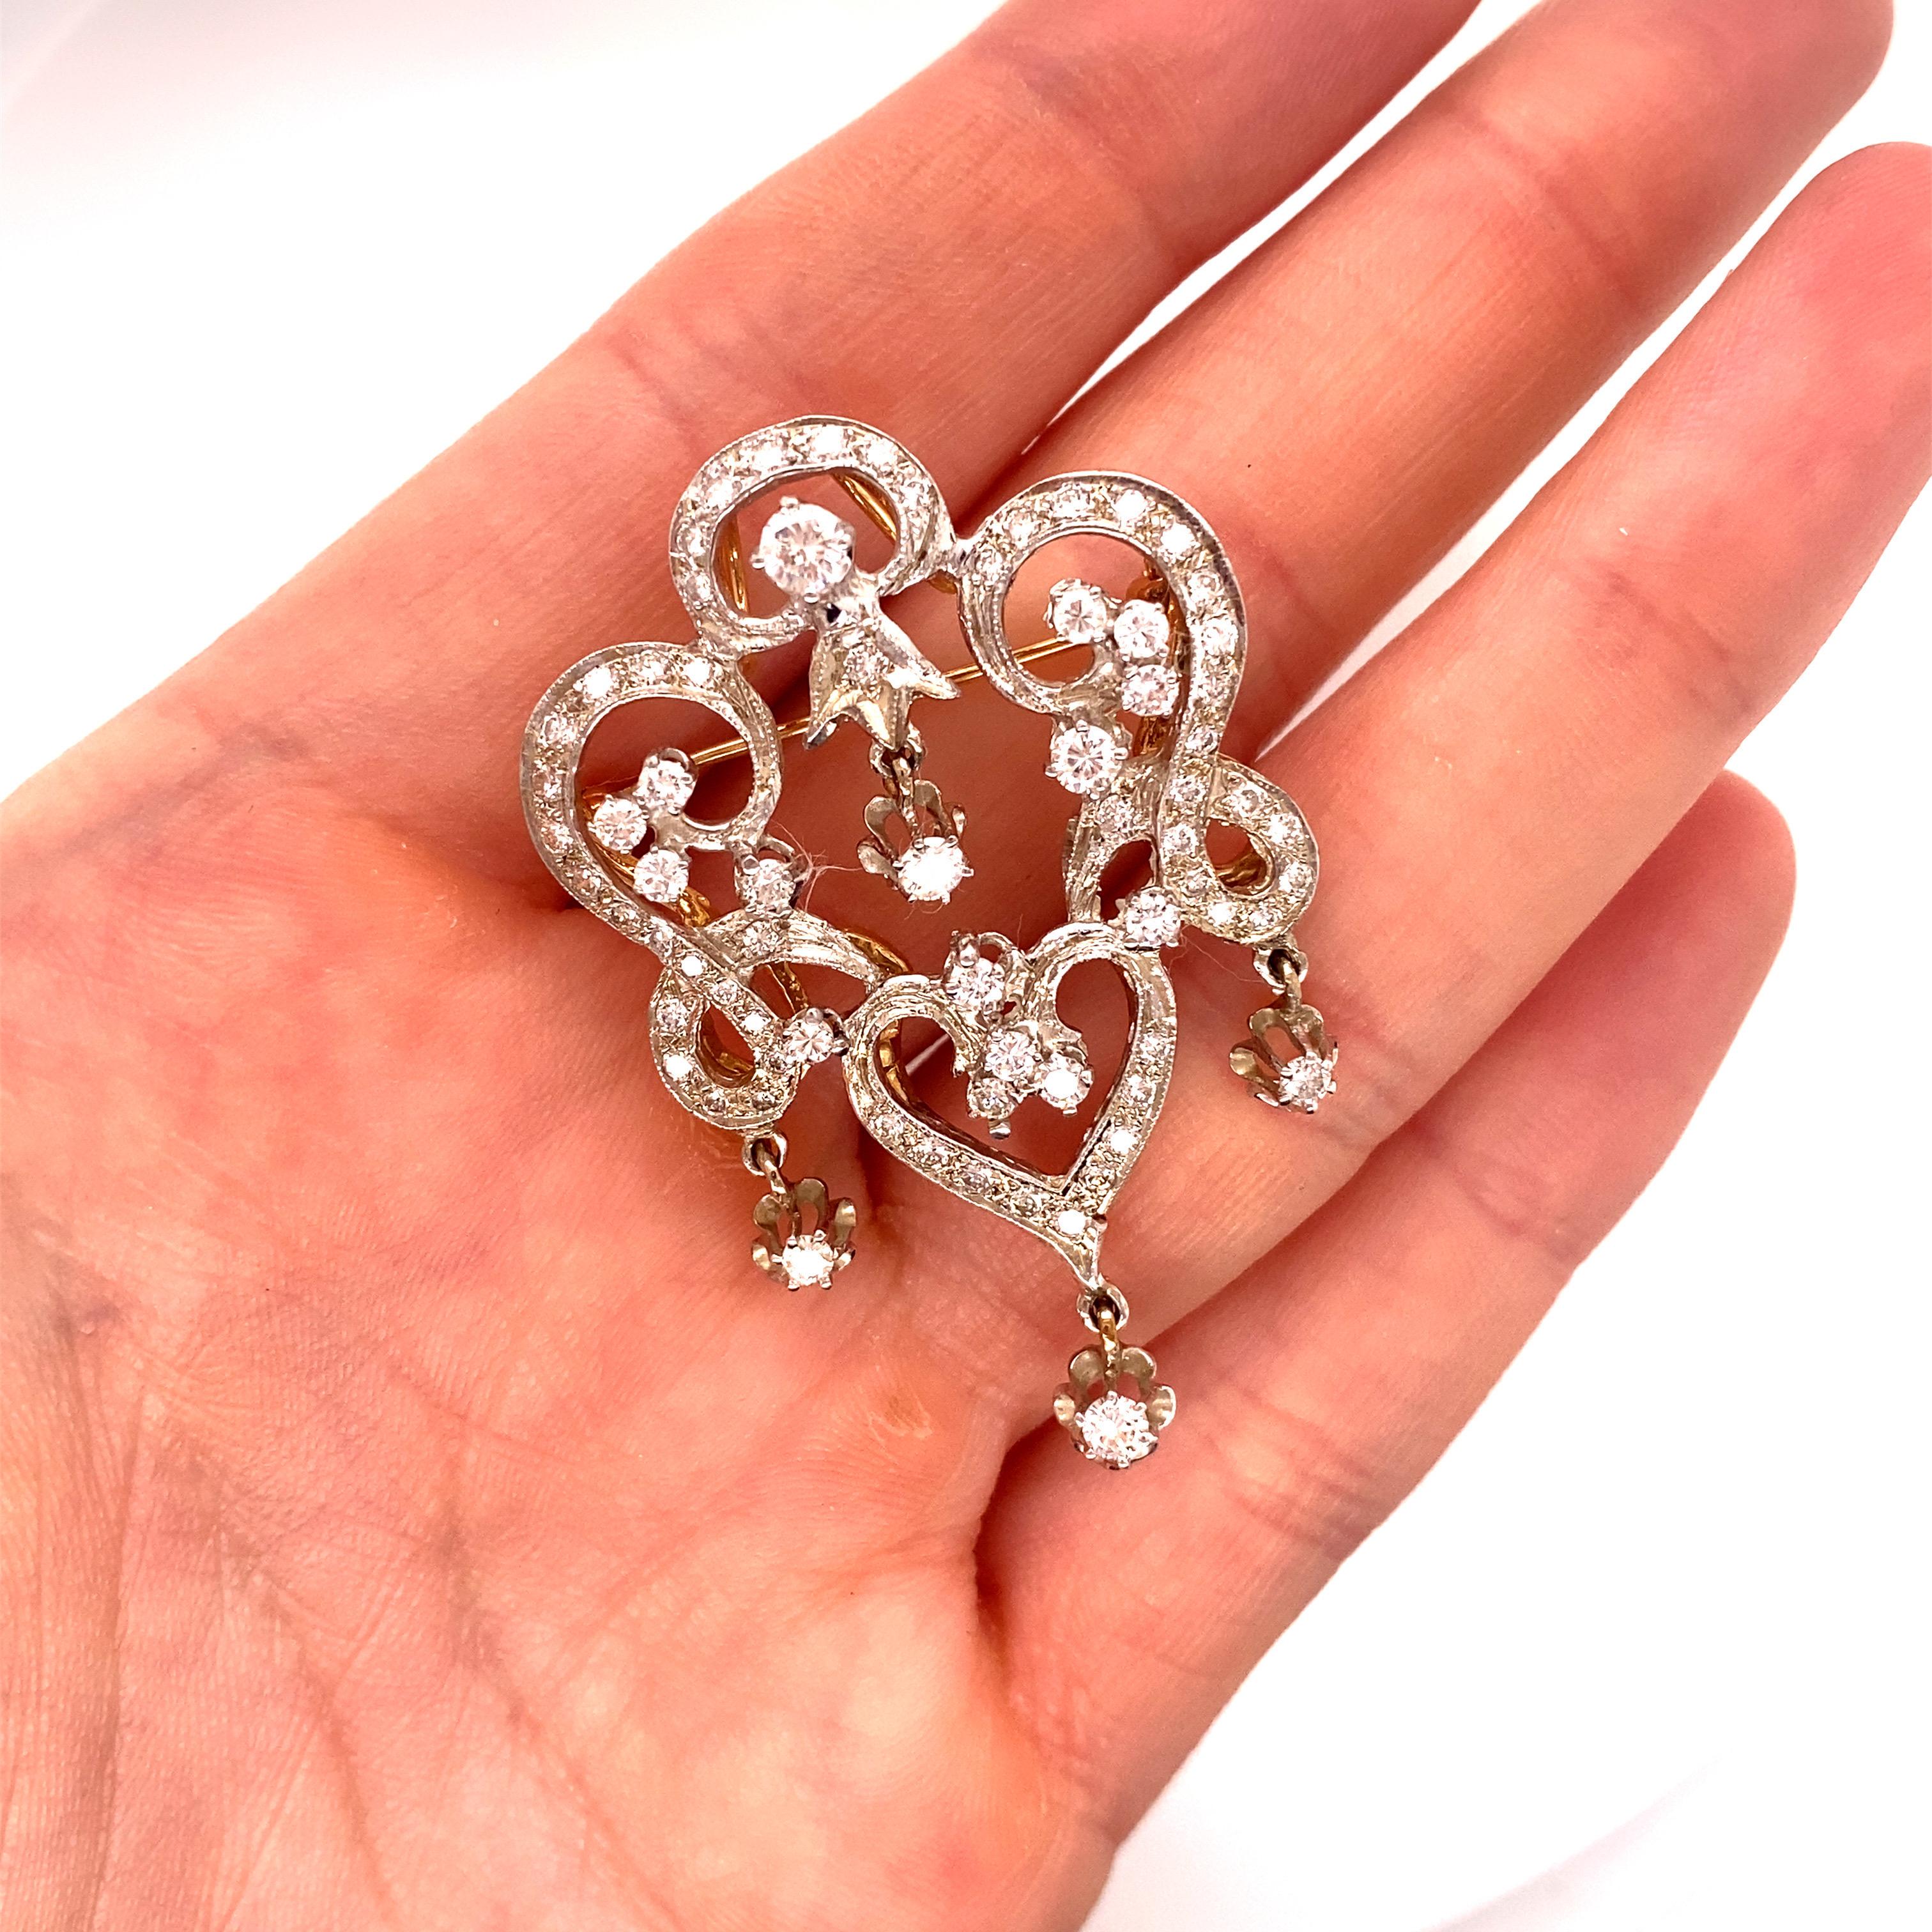 Vintage 1950’s Edwardian Reproduction Diamond Chandelier Brooch and Pendant For Sale 1